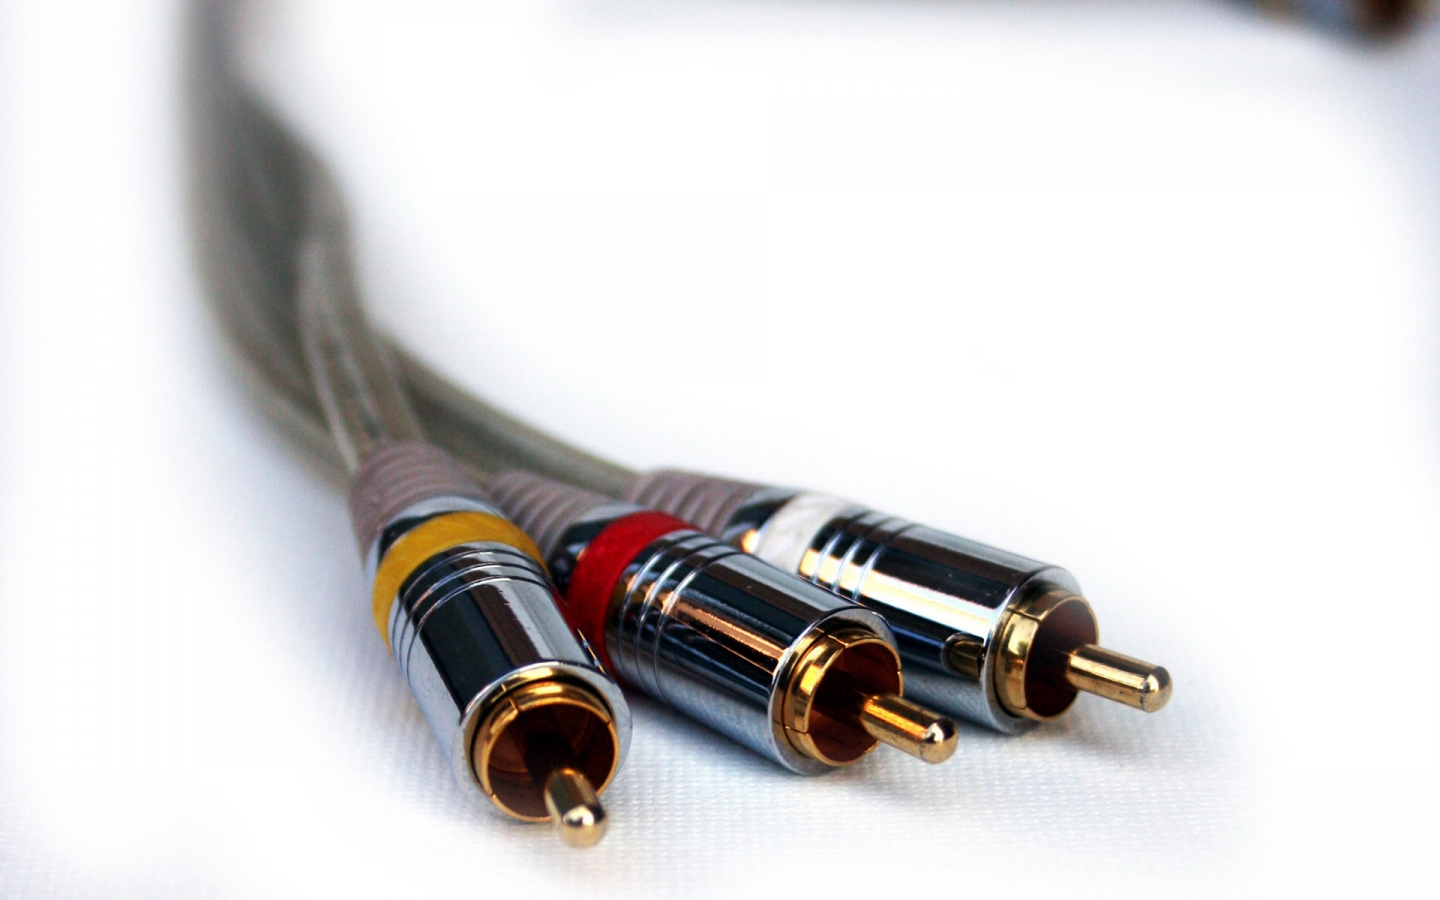 RCA Cable for 1440 x 900 widescreen resolution